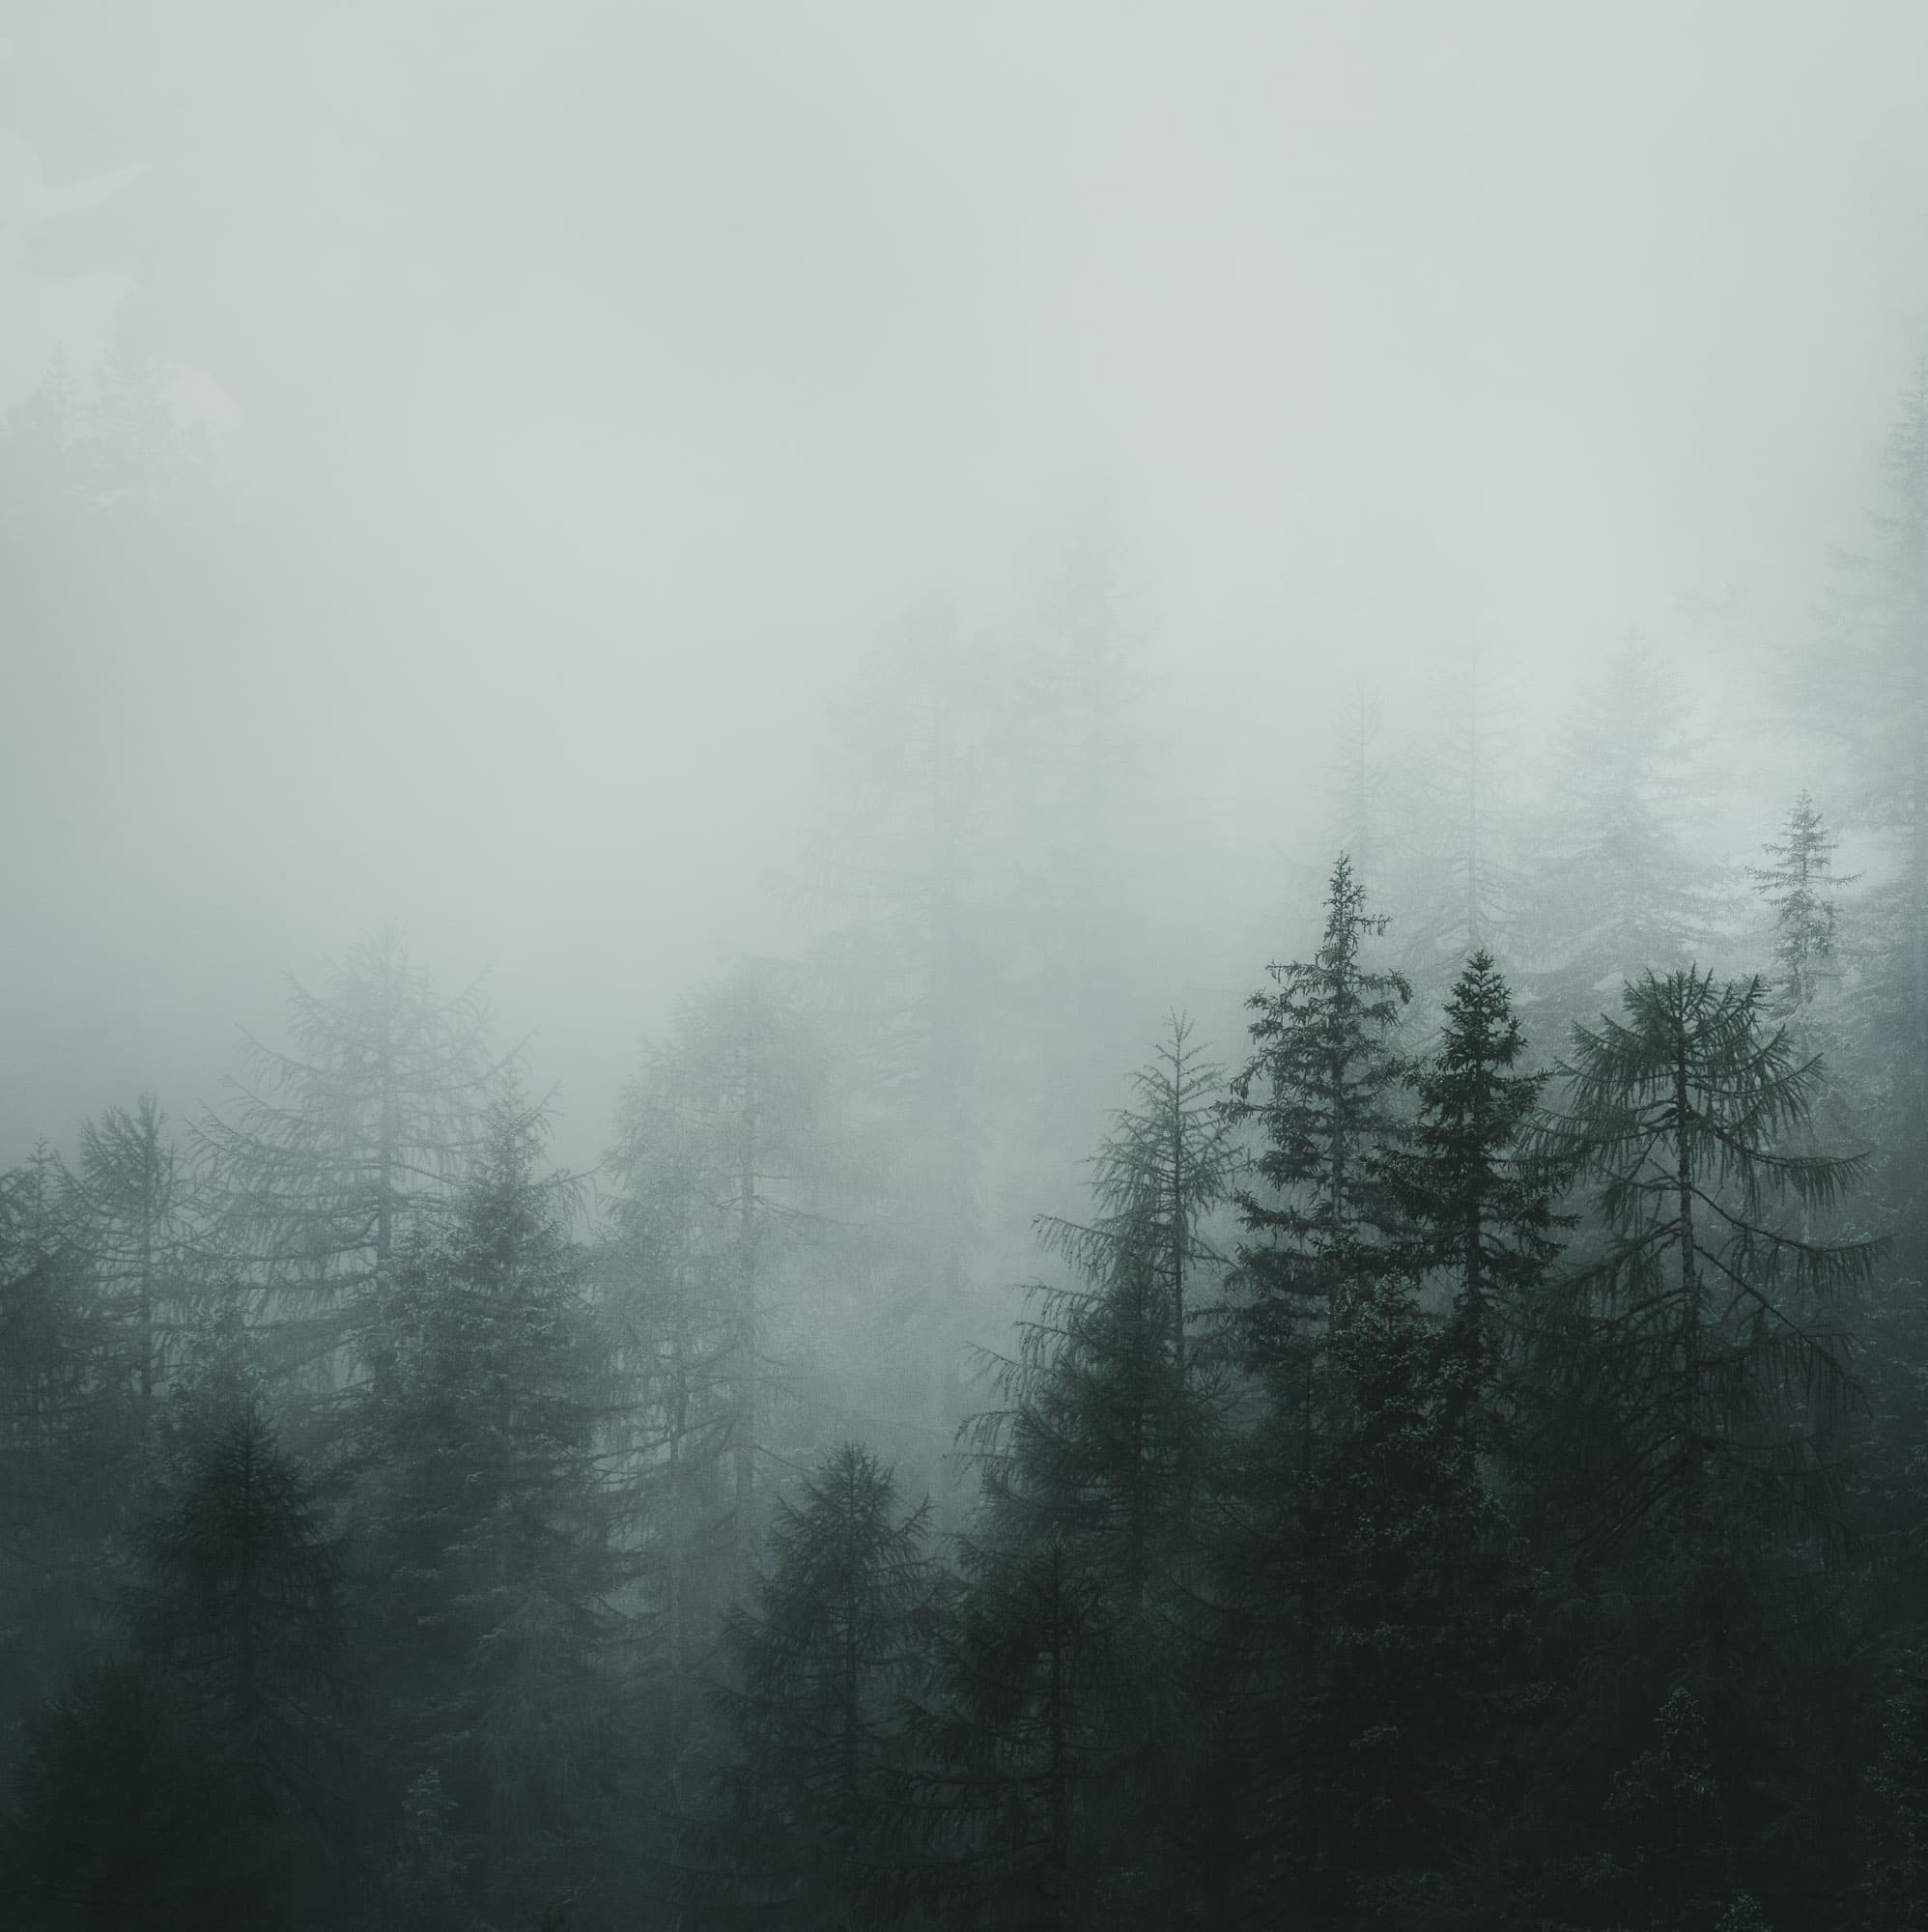 Tall pine trees shrouded in mist, creating a serene, cinematic atmosphere in the Dolomites, Italy.